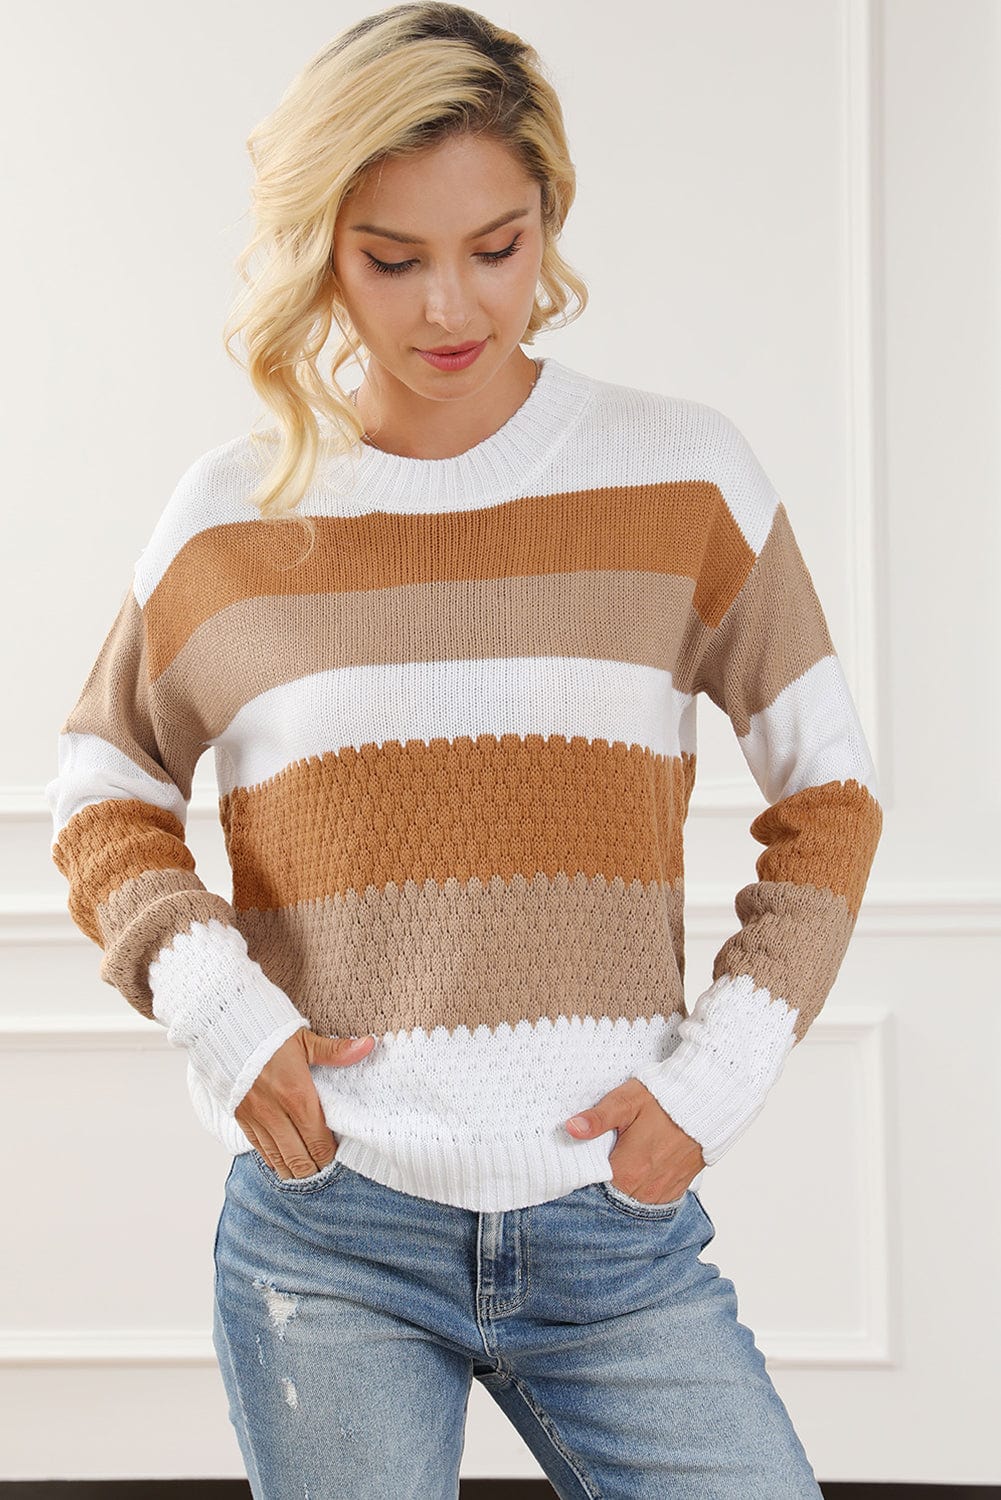 The802Gypsy  Tops Chestnut Striped Cable Knit Drop Shoulder Sweater